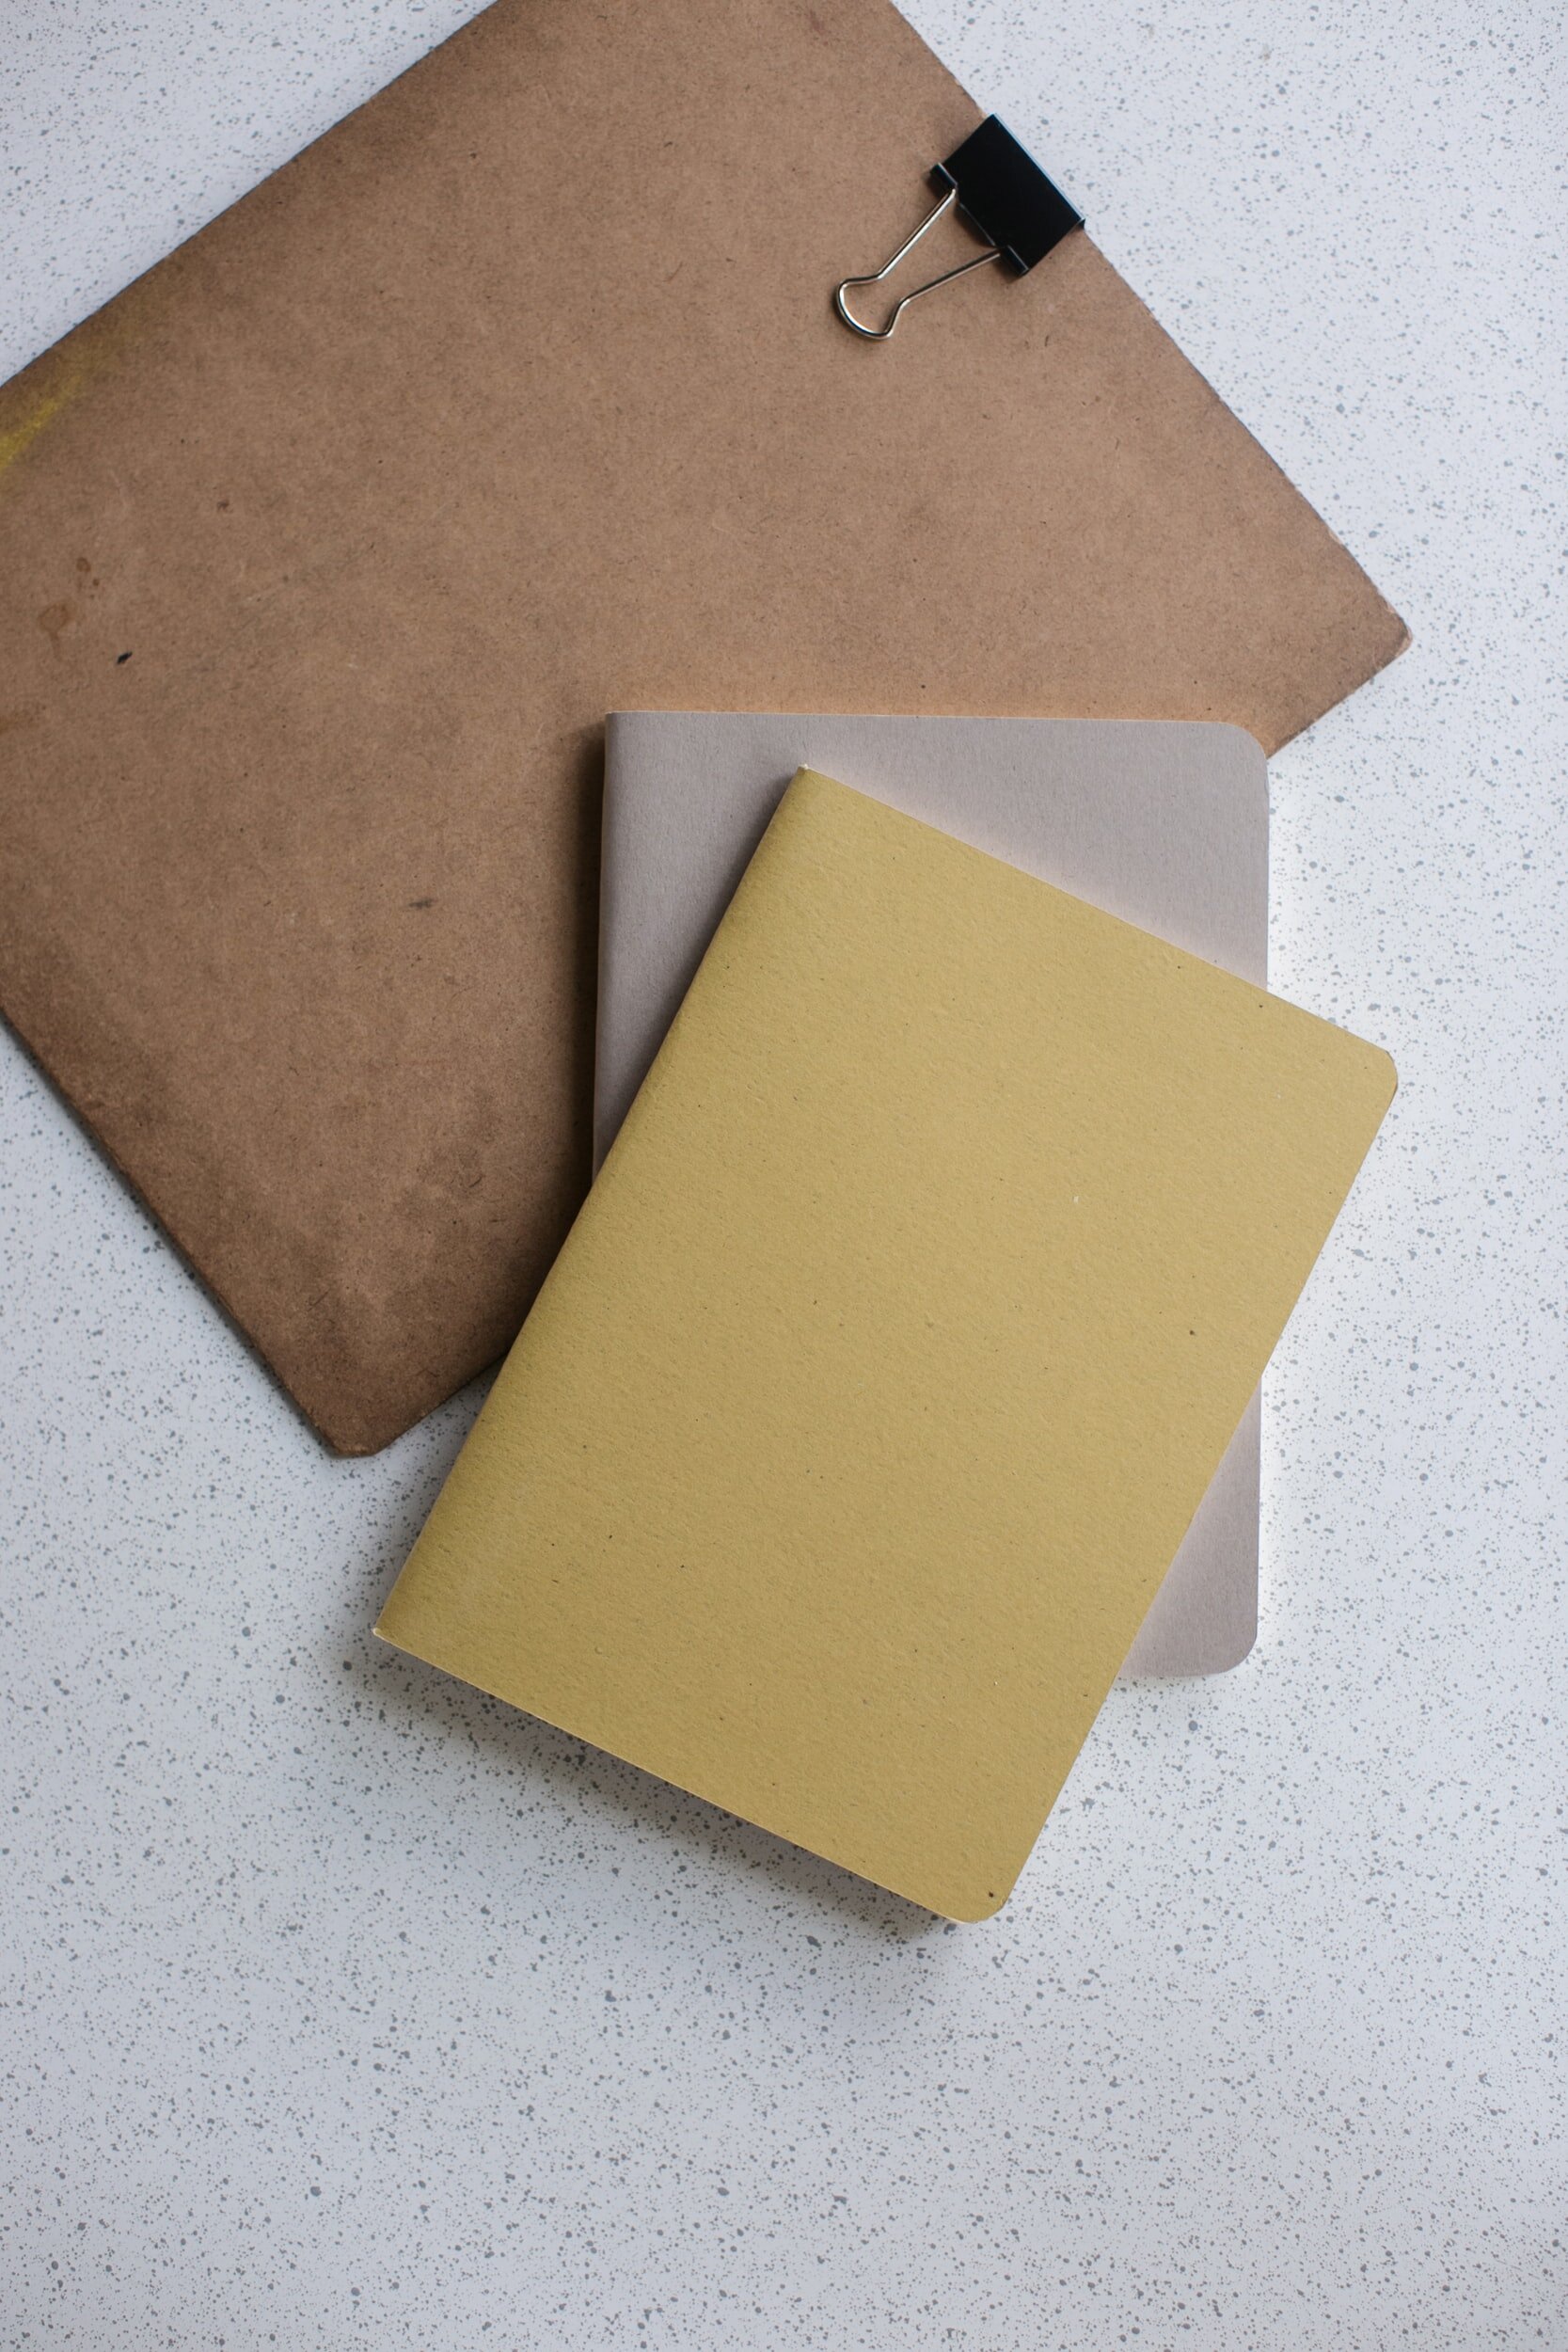 Photo by Laika on Unsplash A brown folder with a black paper clip.